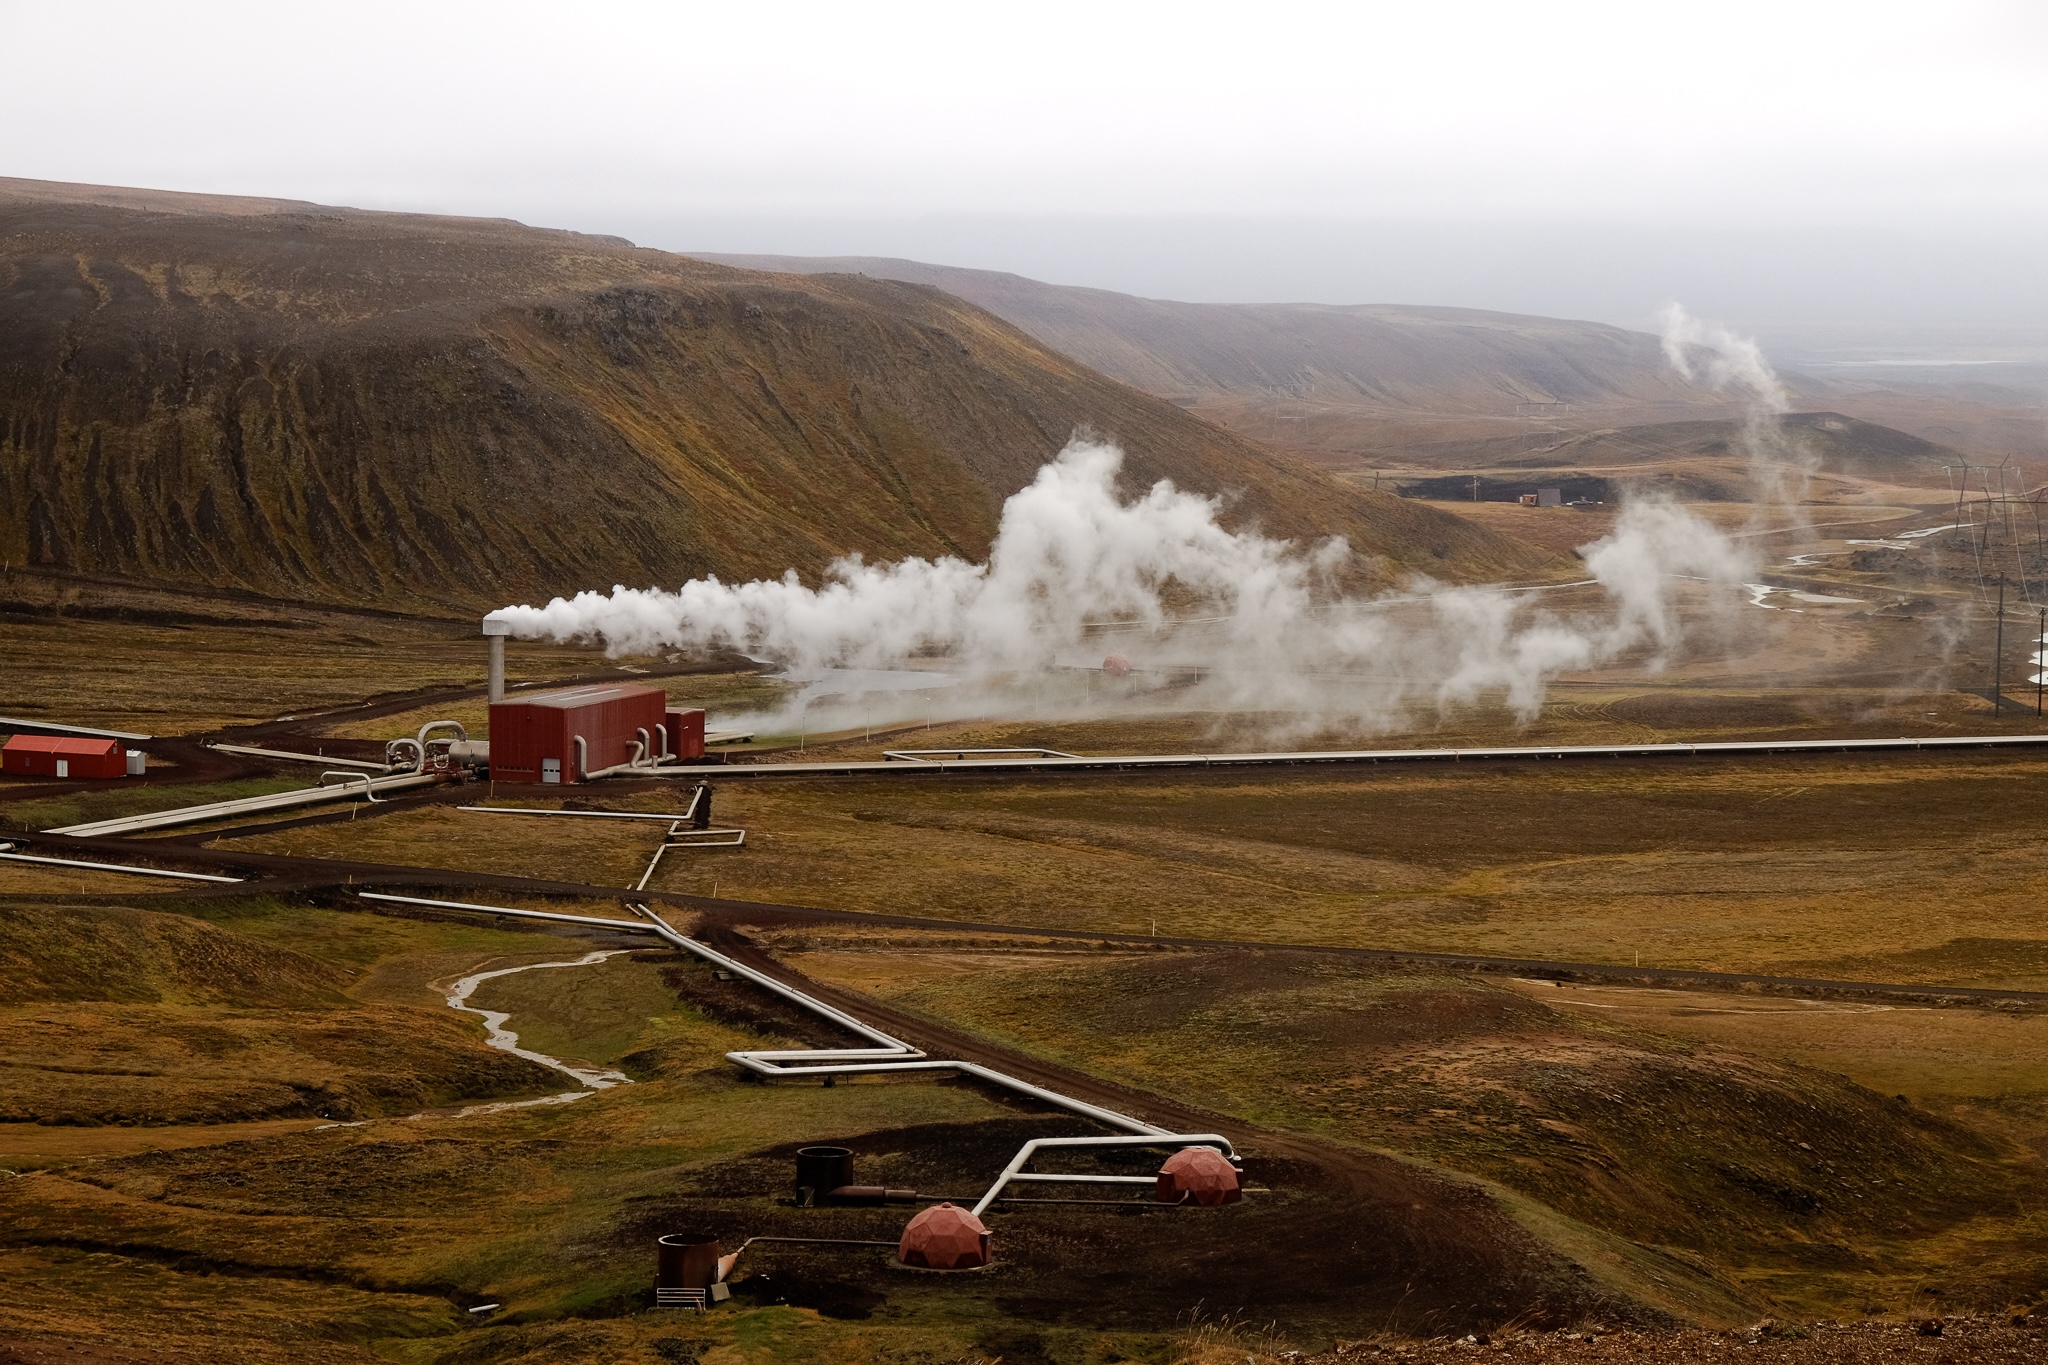 A geothermal powerplant red building is gushing white steam from a vent, the steam travels across the landscape as it dissapates into the air